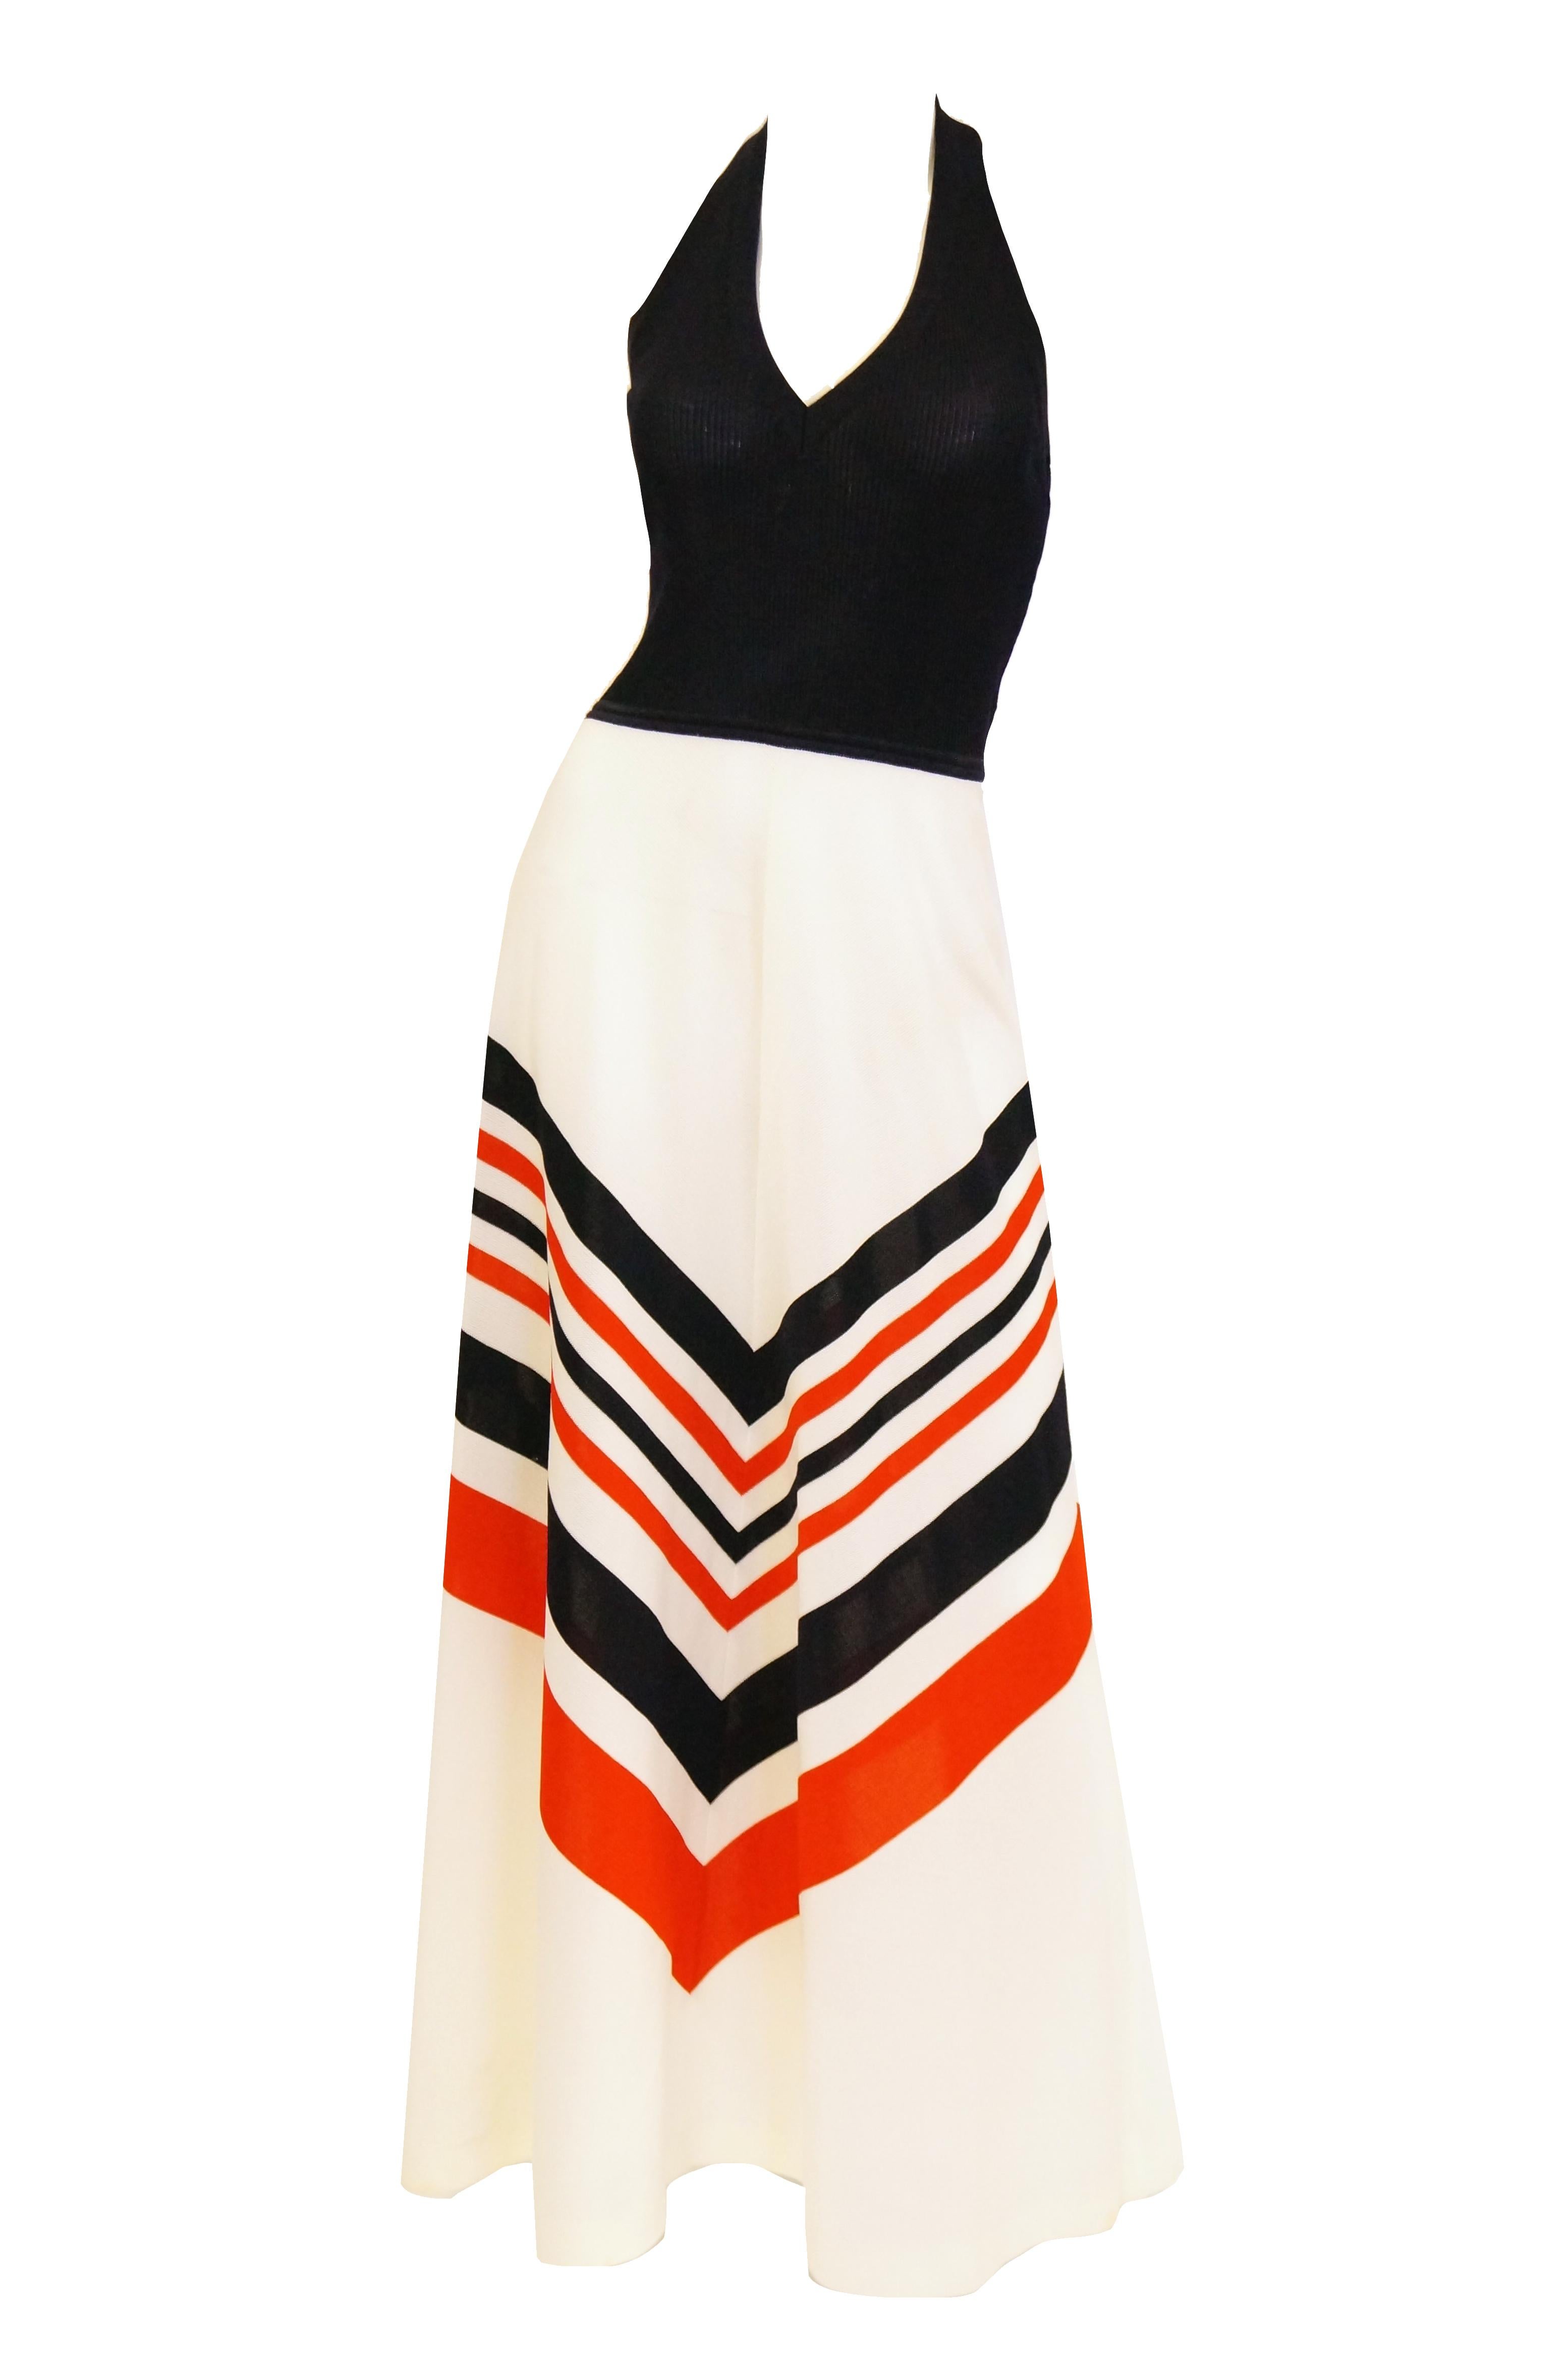 This playful yet elegant maxi length dress is simply fabulous! The dress has an A - line silhouette, with white skirt featuring red and blue chevron stripes, and a fitted rib knit top. The top has a deep  V - neck halter neckline, is sleeveless, and